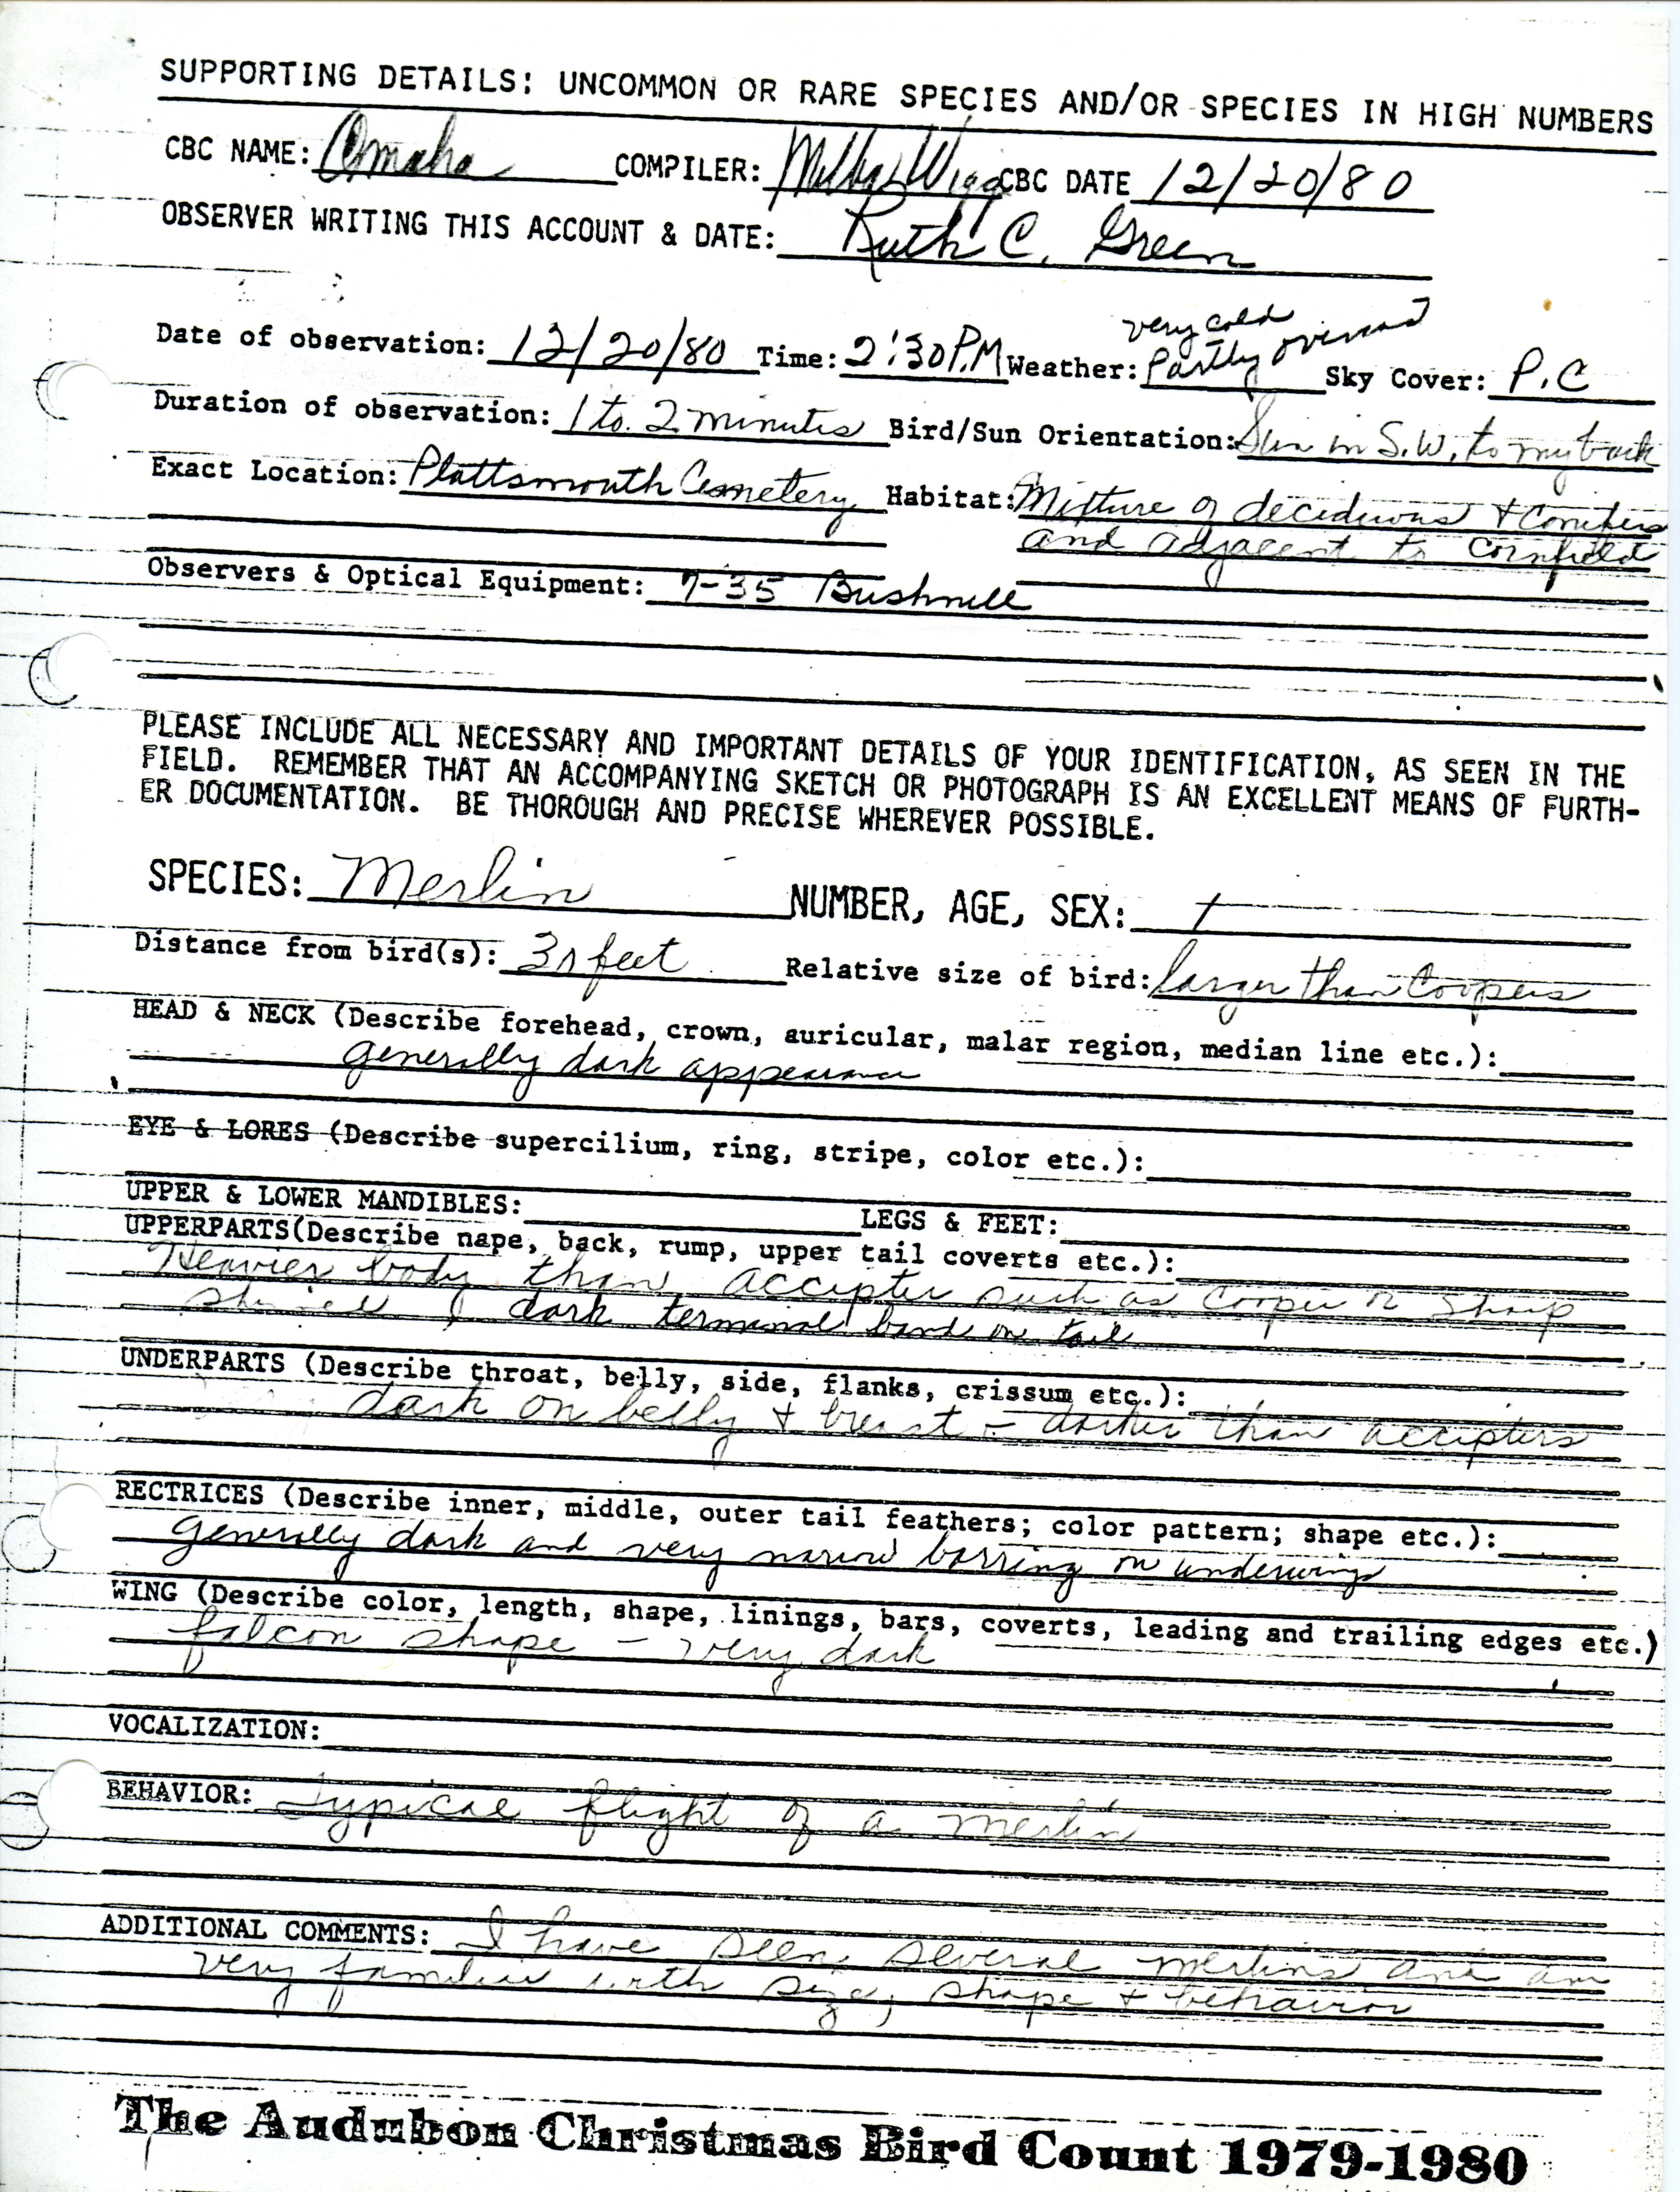 Supporting details form for Merlin sighting submitted by Ruth Green, December 20 1980